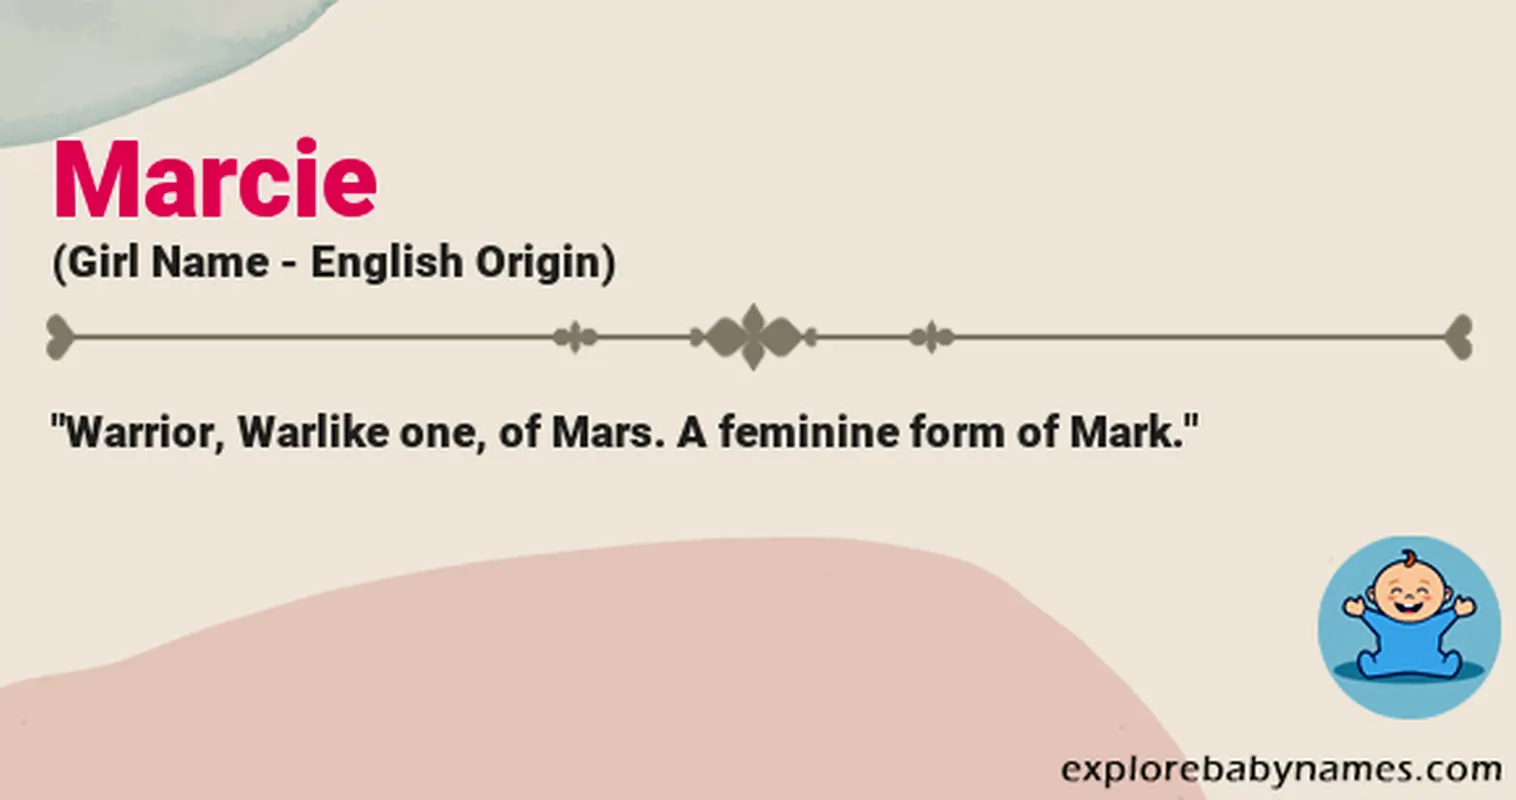 Meaning of Marcie